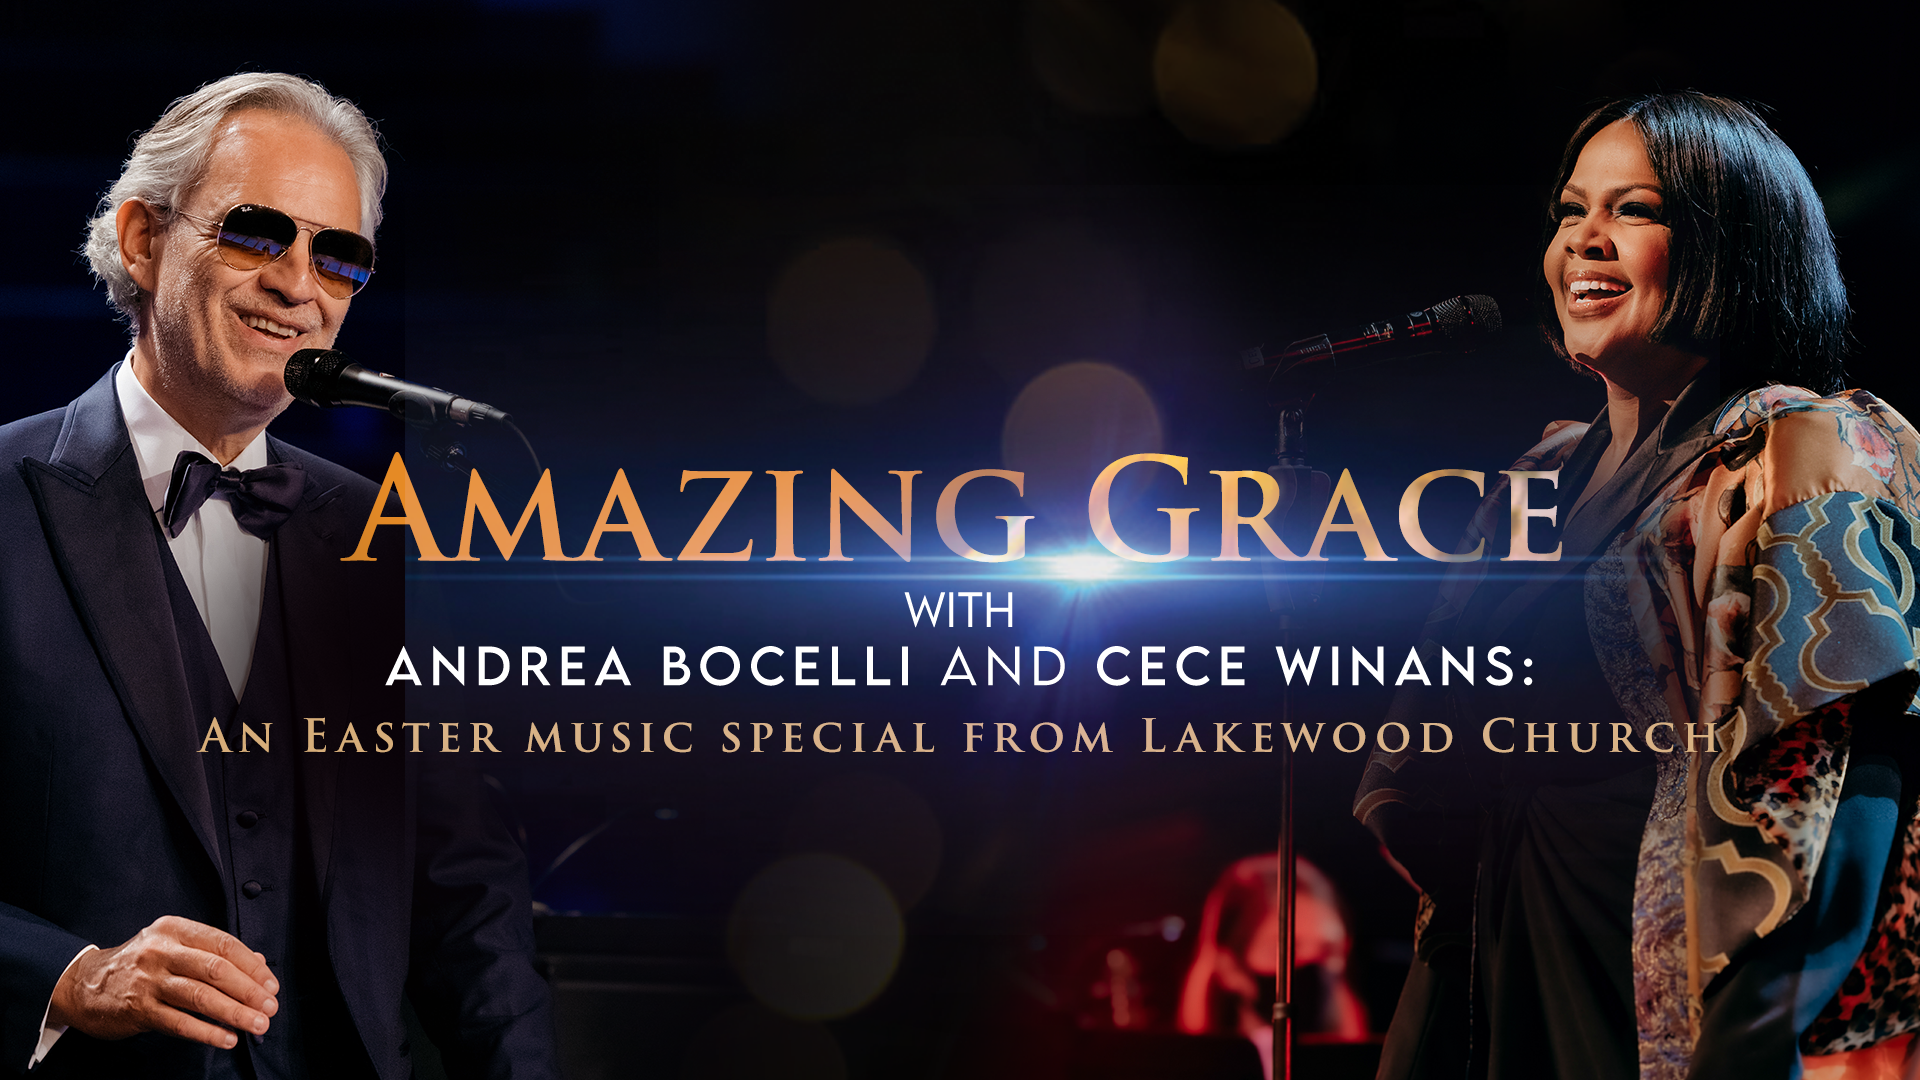 Amazing Grace with Andrea Bocelli and Cece Winans